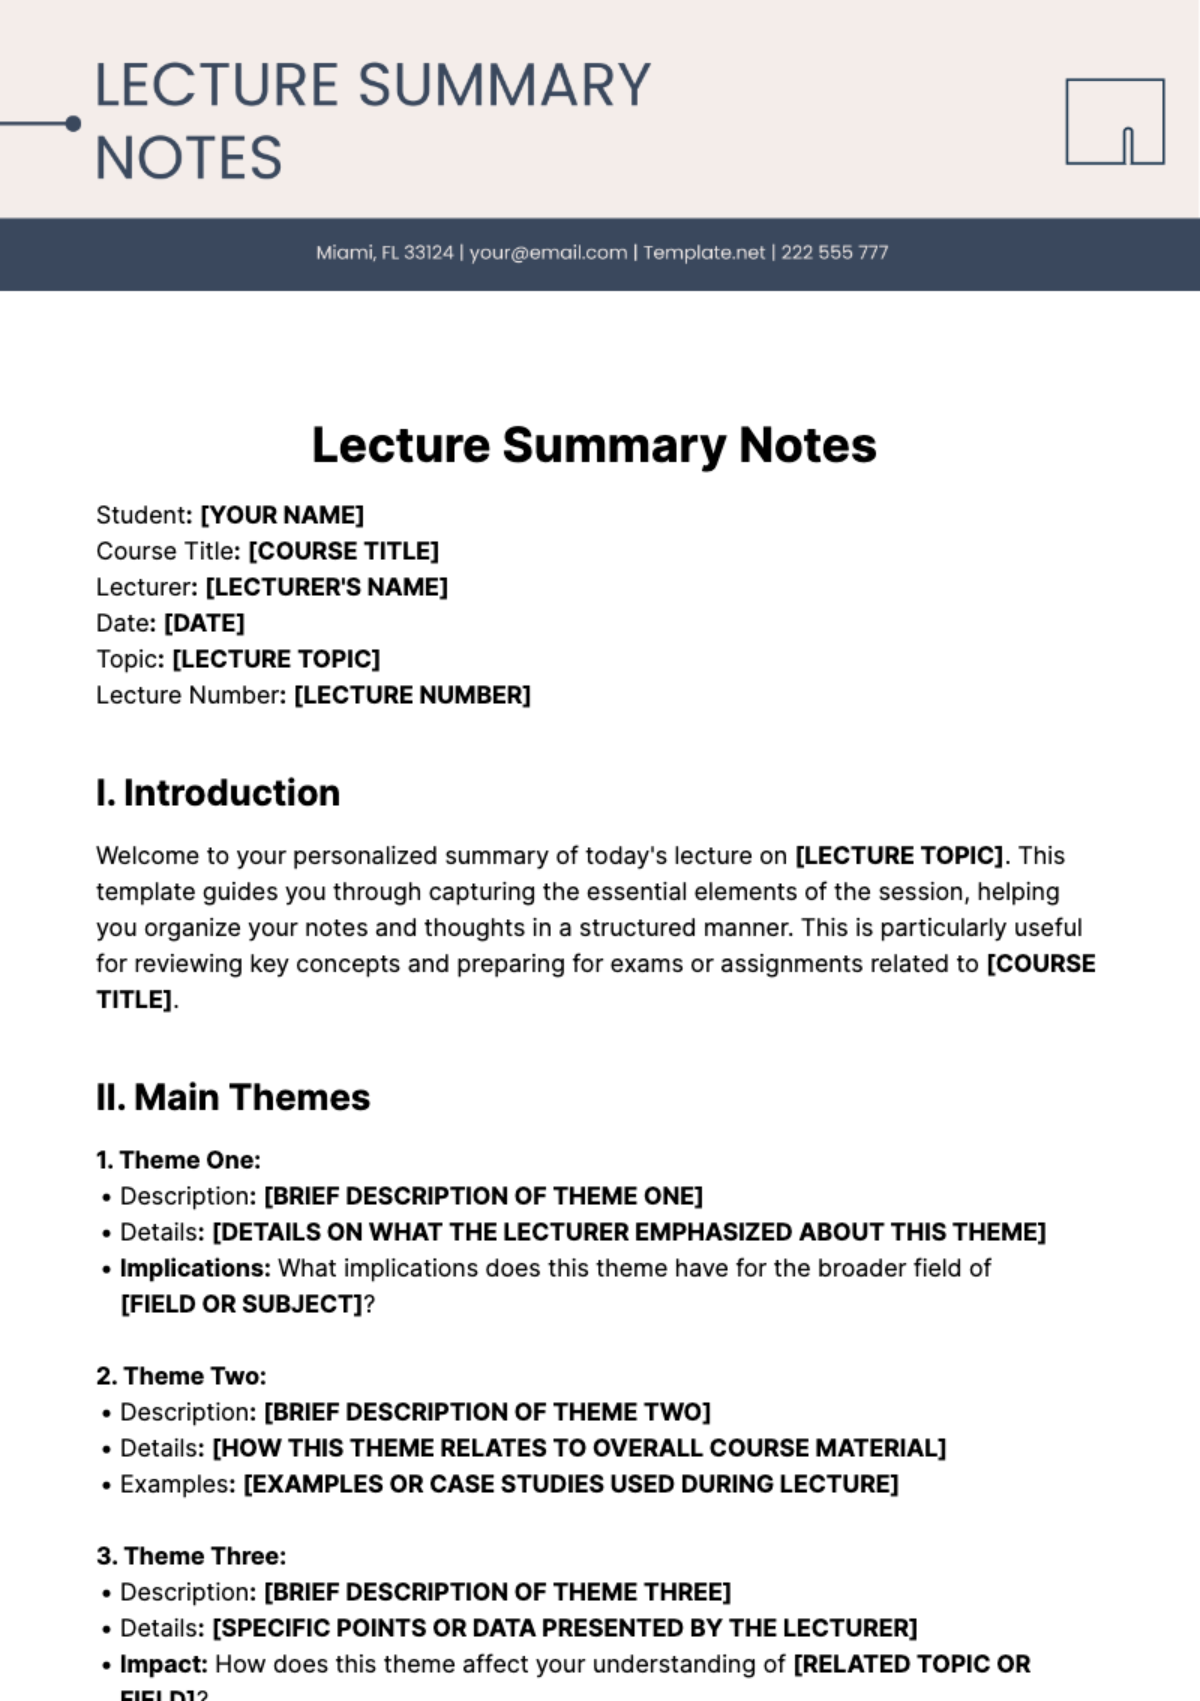 Free Lecture Summary Notes Template